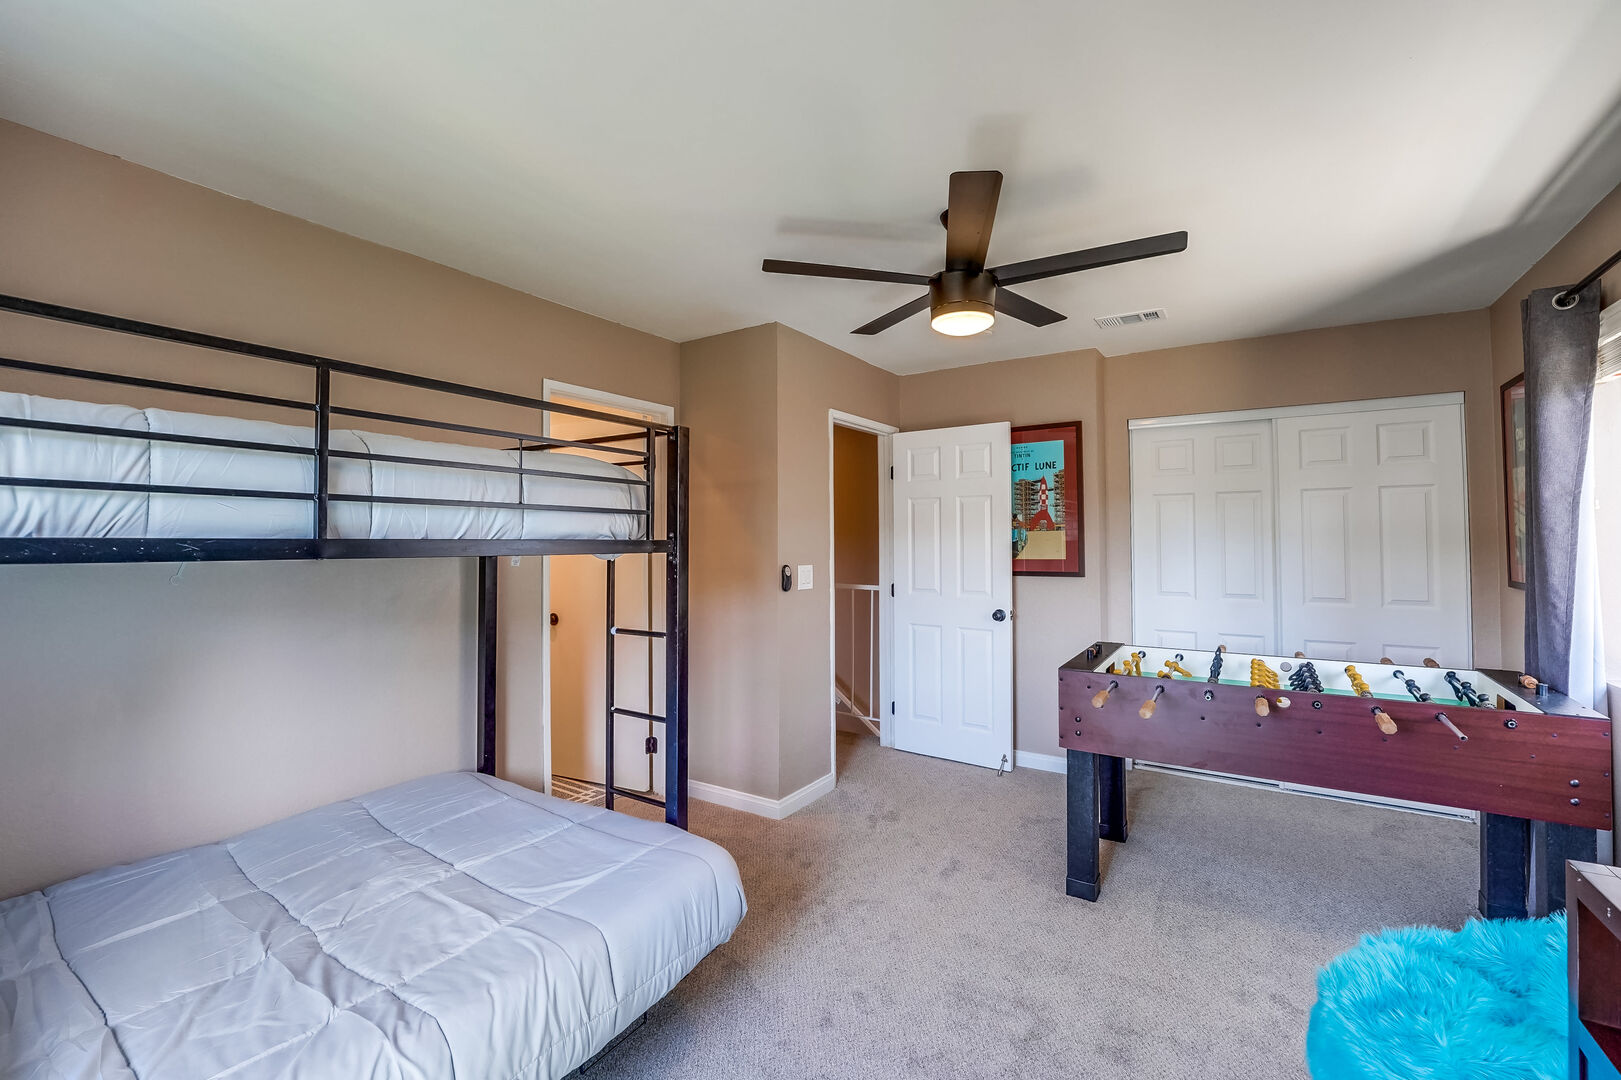 Remote-controlled ceiling fan, bean bag chairs, foosball table, closet and in-suite full bathroom